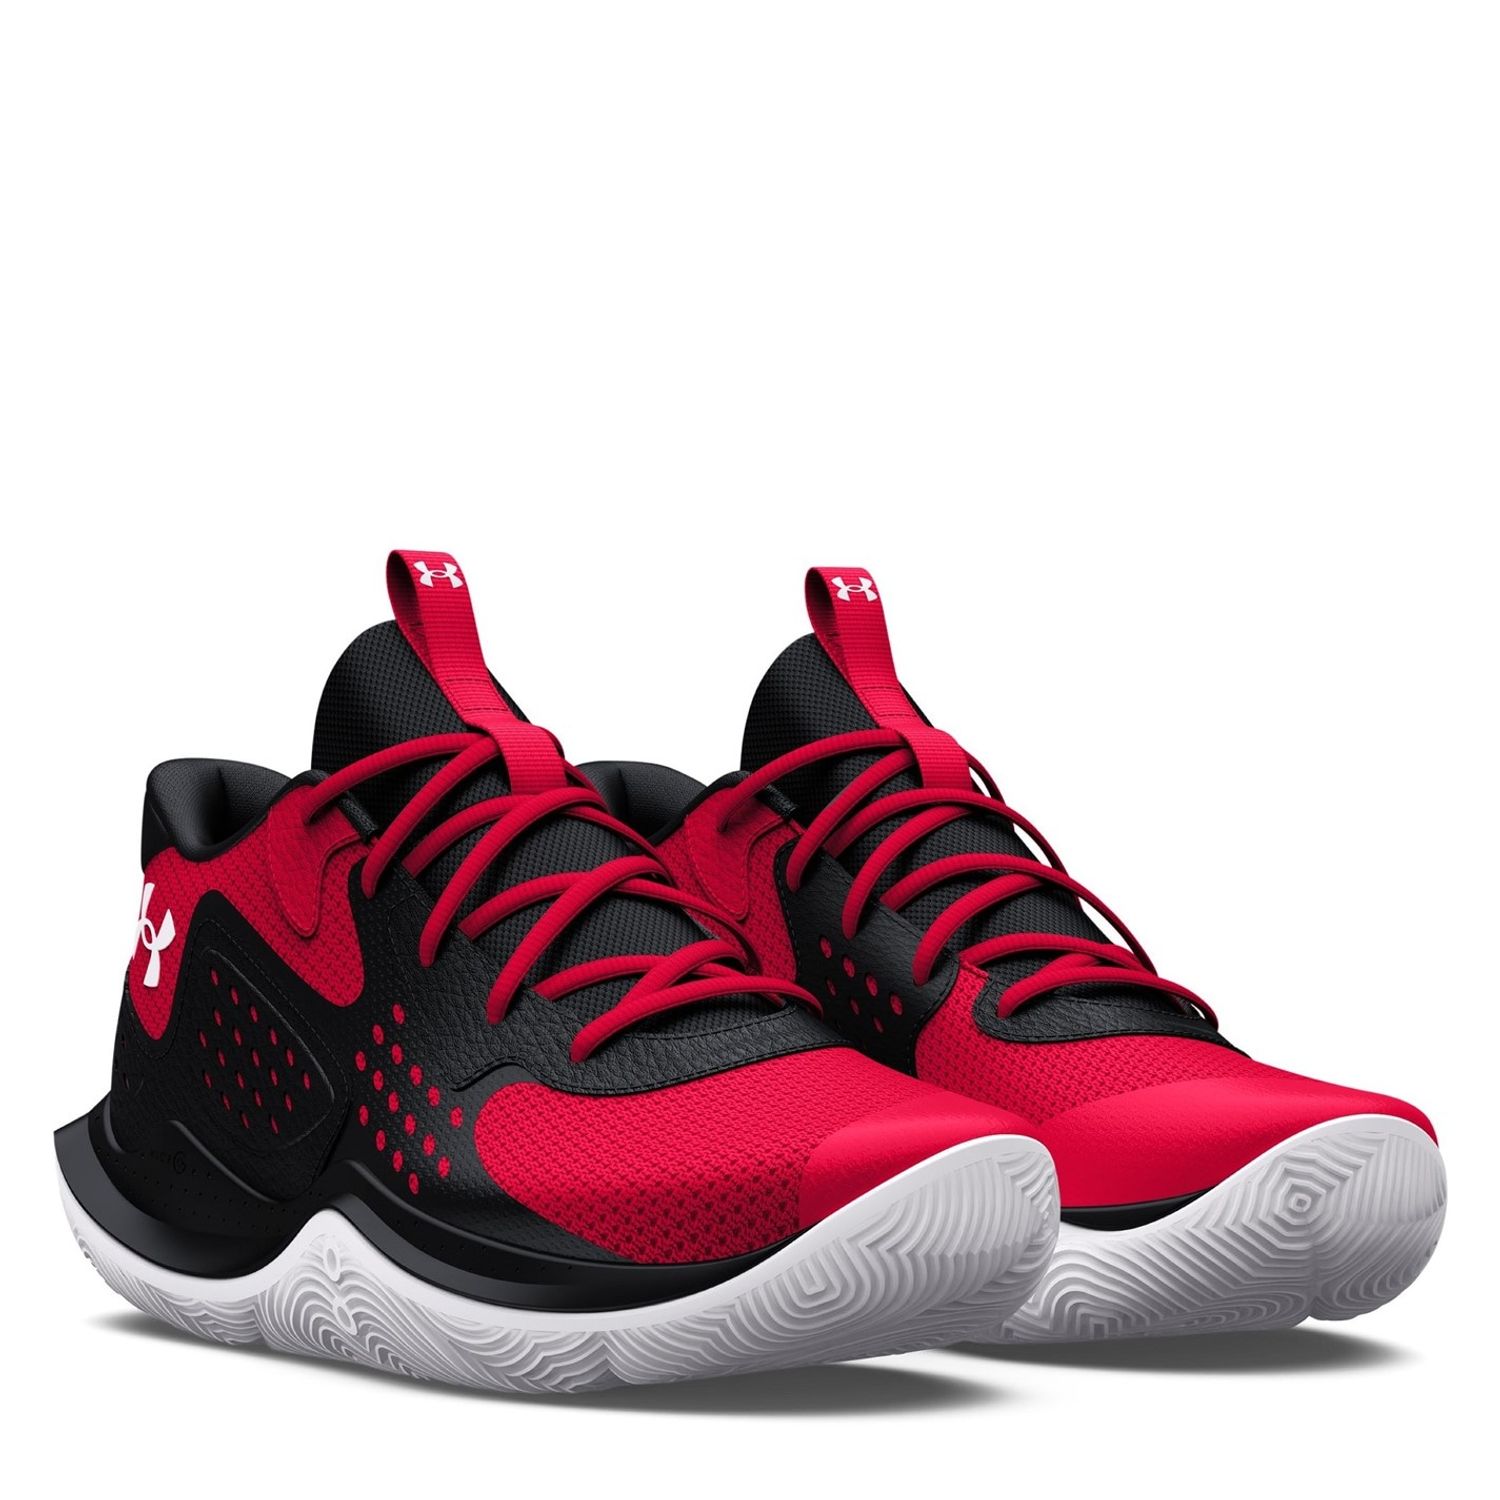 Red Under Armour Mens Jet 23 Basketball Shoes - Get The Label